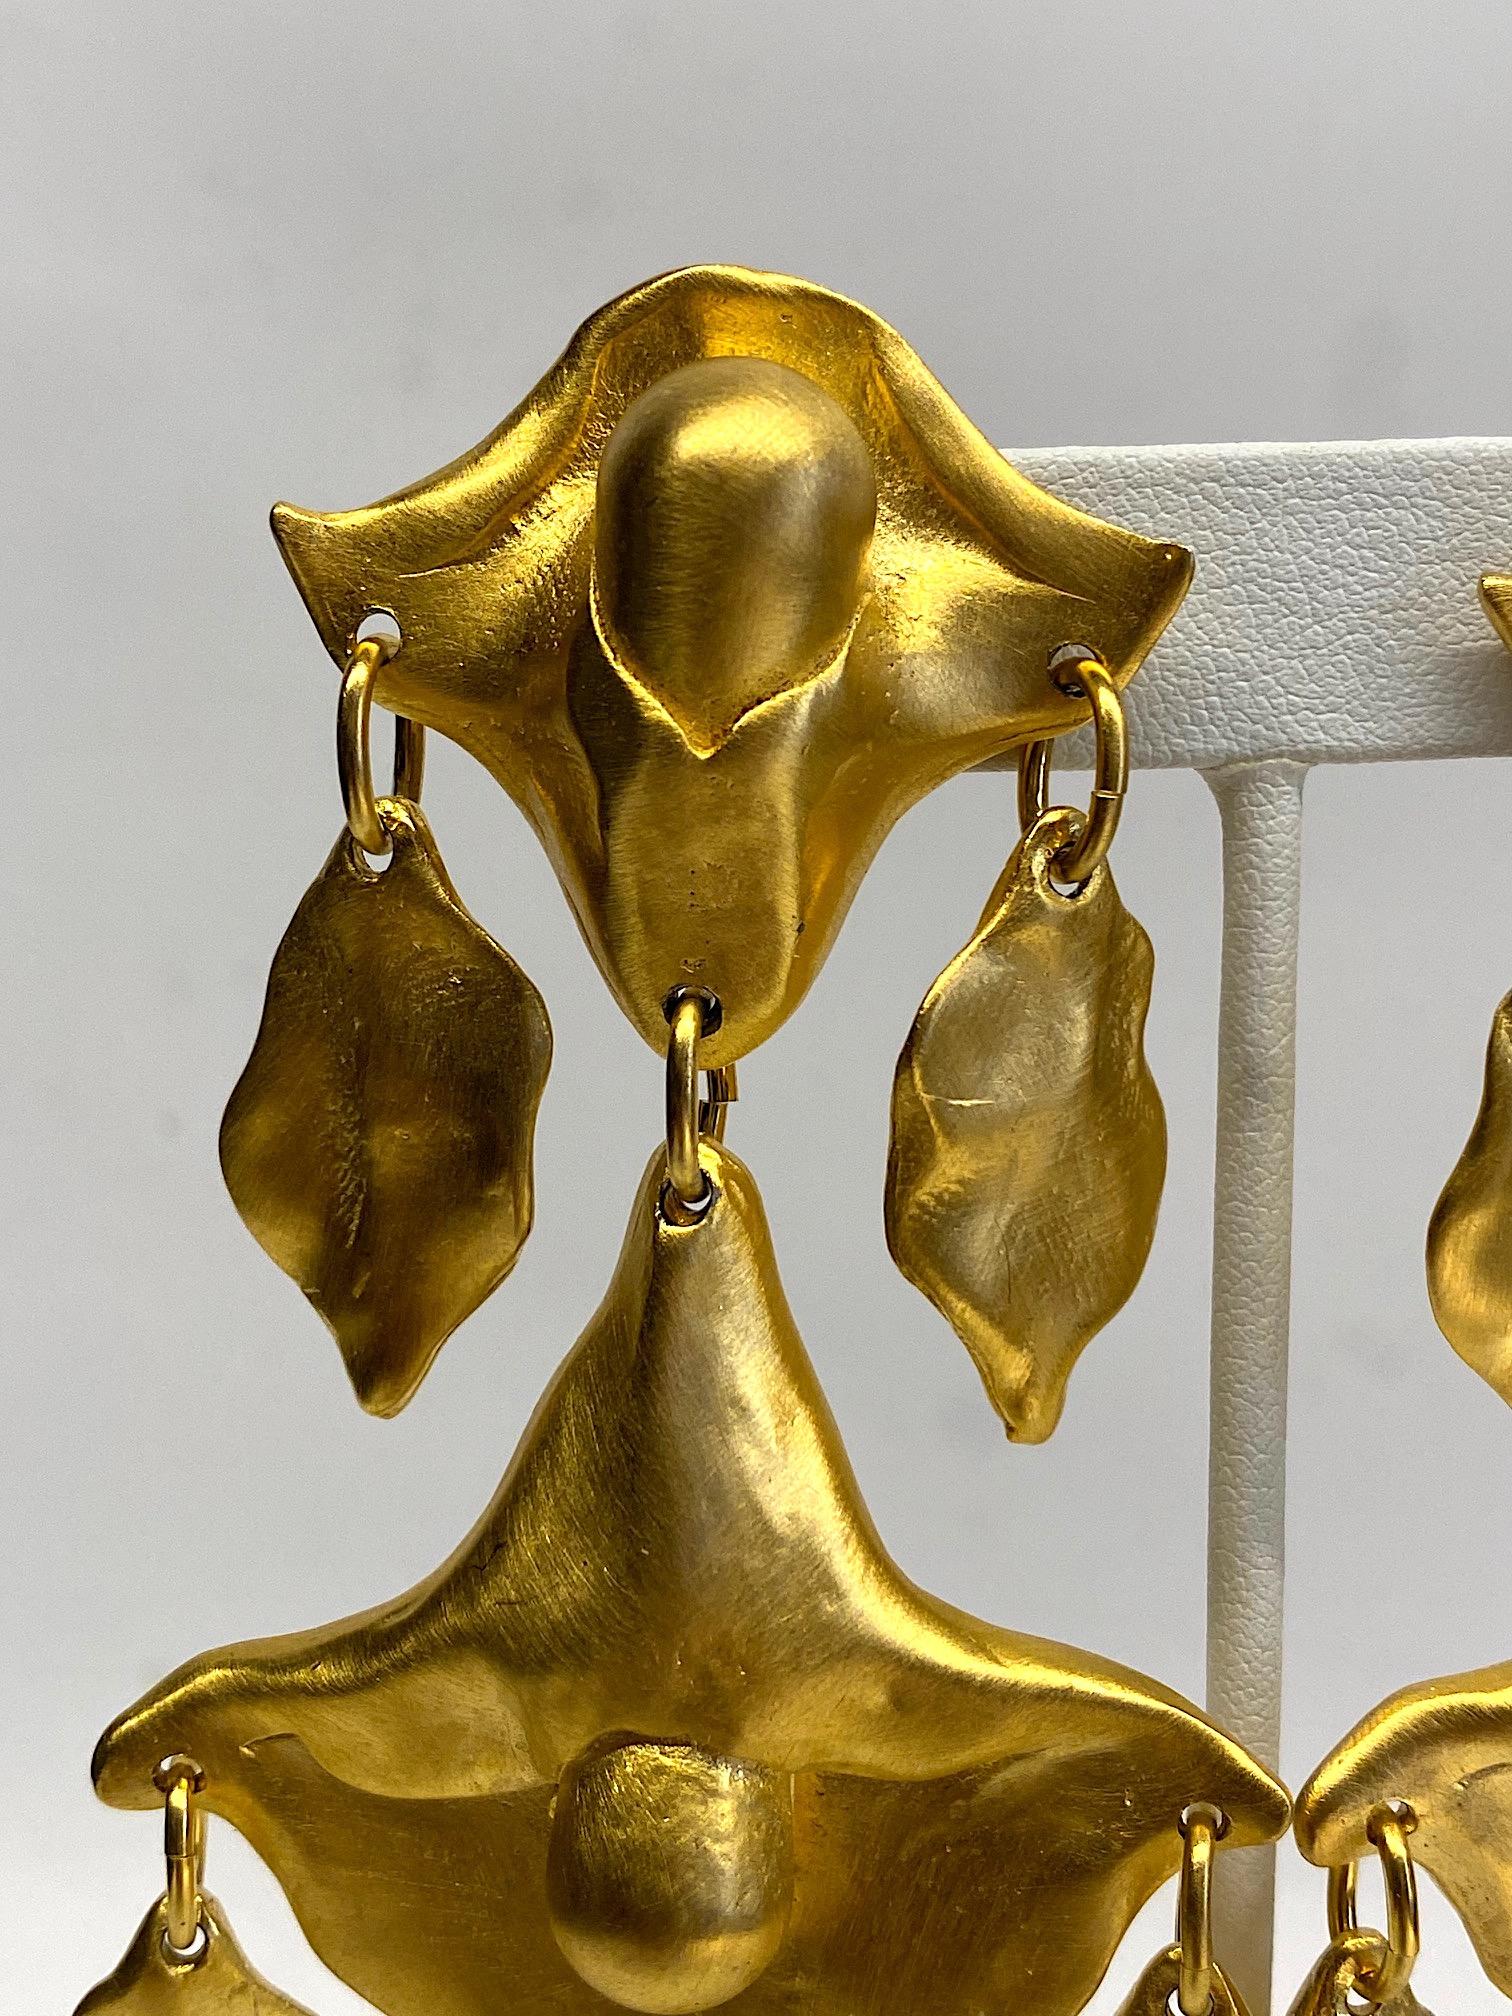 A remarkable pair of huge pendant earrings in the style of Clara Studio Inc. of NY. Clara Studio Inc. was founded in 1979 by  Clara Kasavina-Berger. Clara Studio has been producing find and costume jewelry ever since in small collections and always